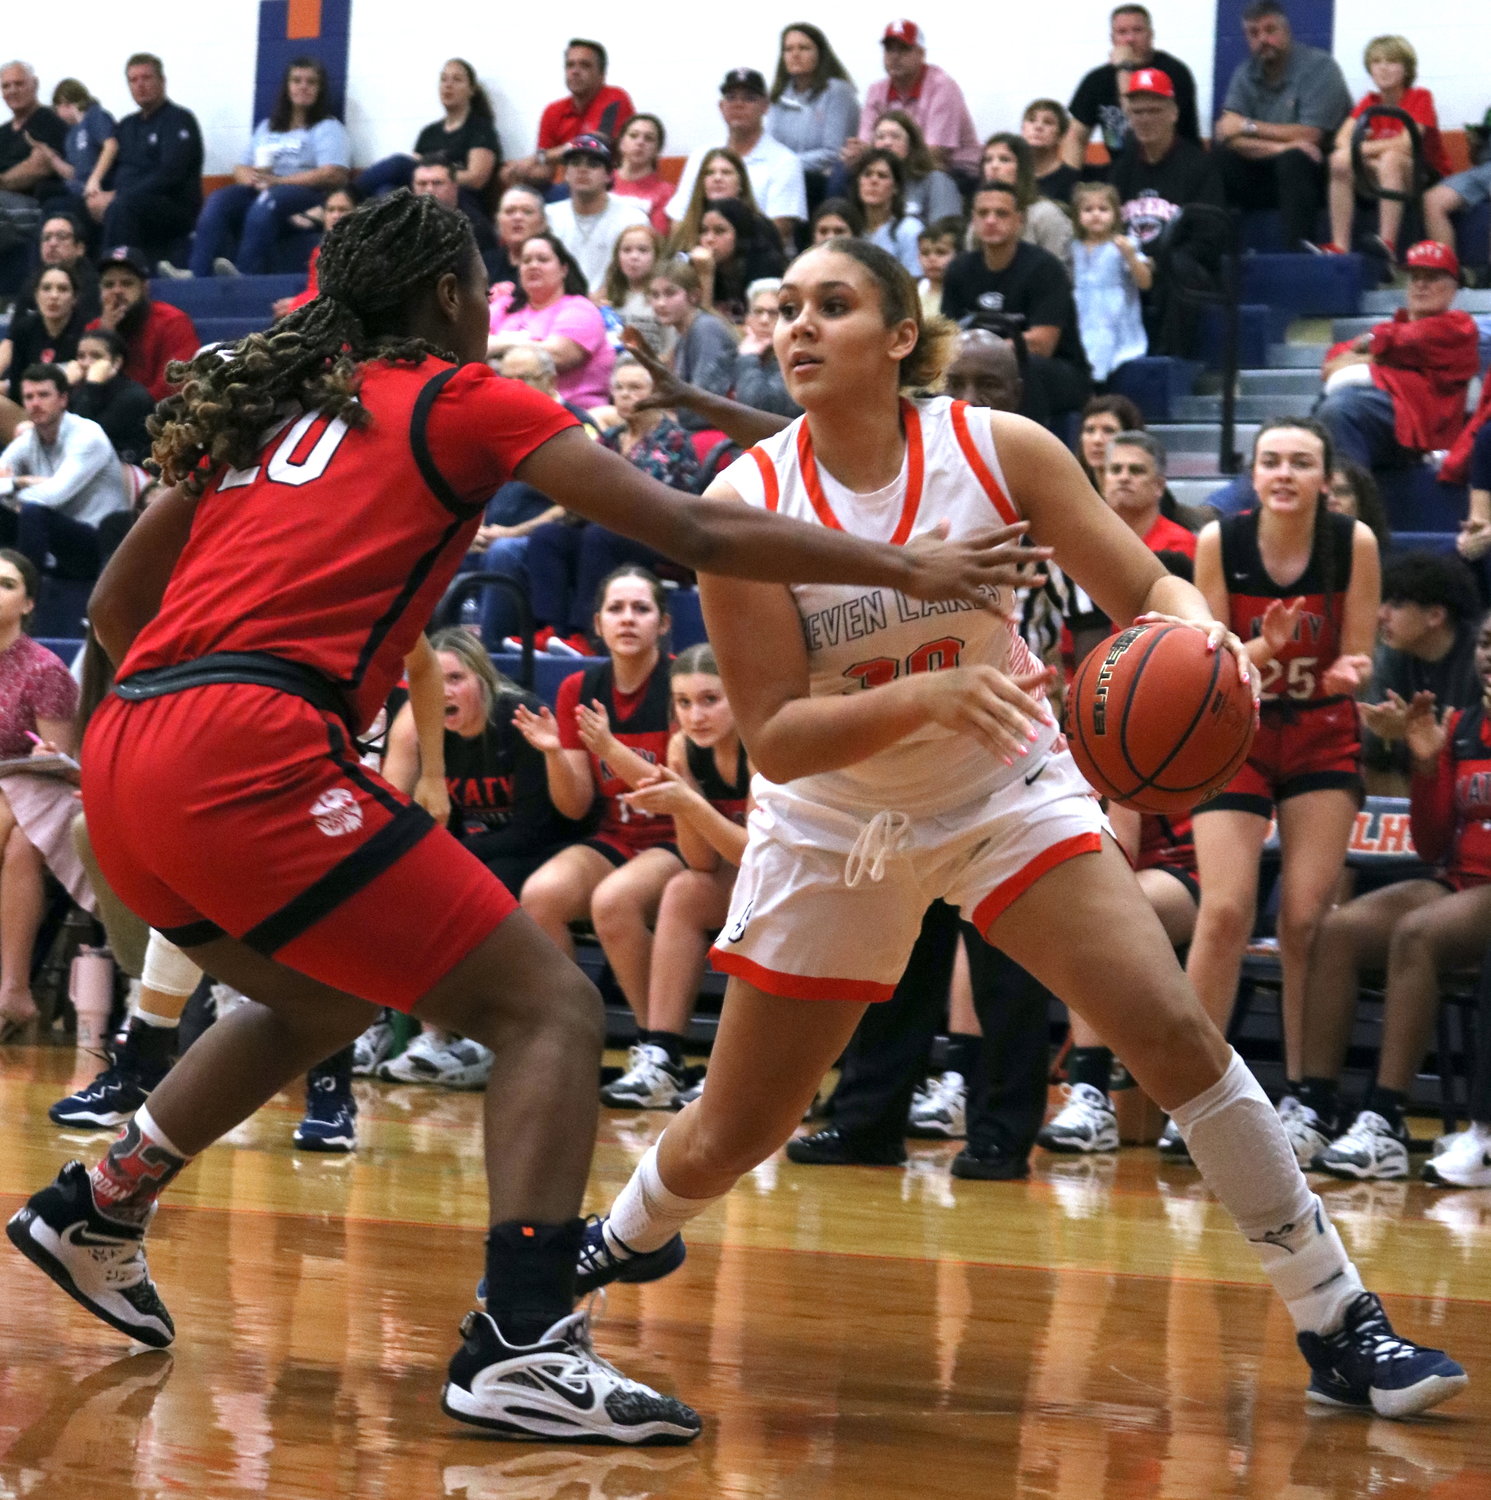 Justice Carlton drives baseline during Tuesday's game between Katy and Seven Lakes at the Seven Lakes gym.